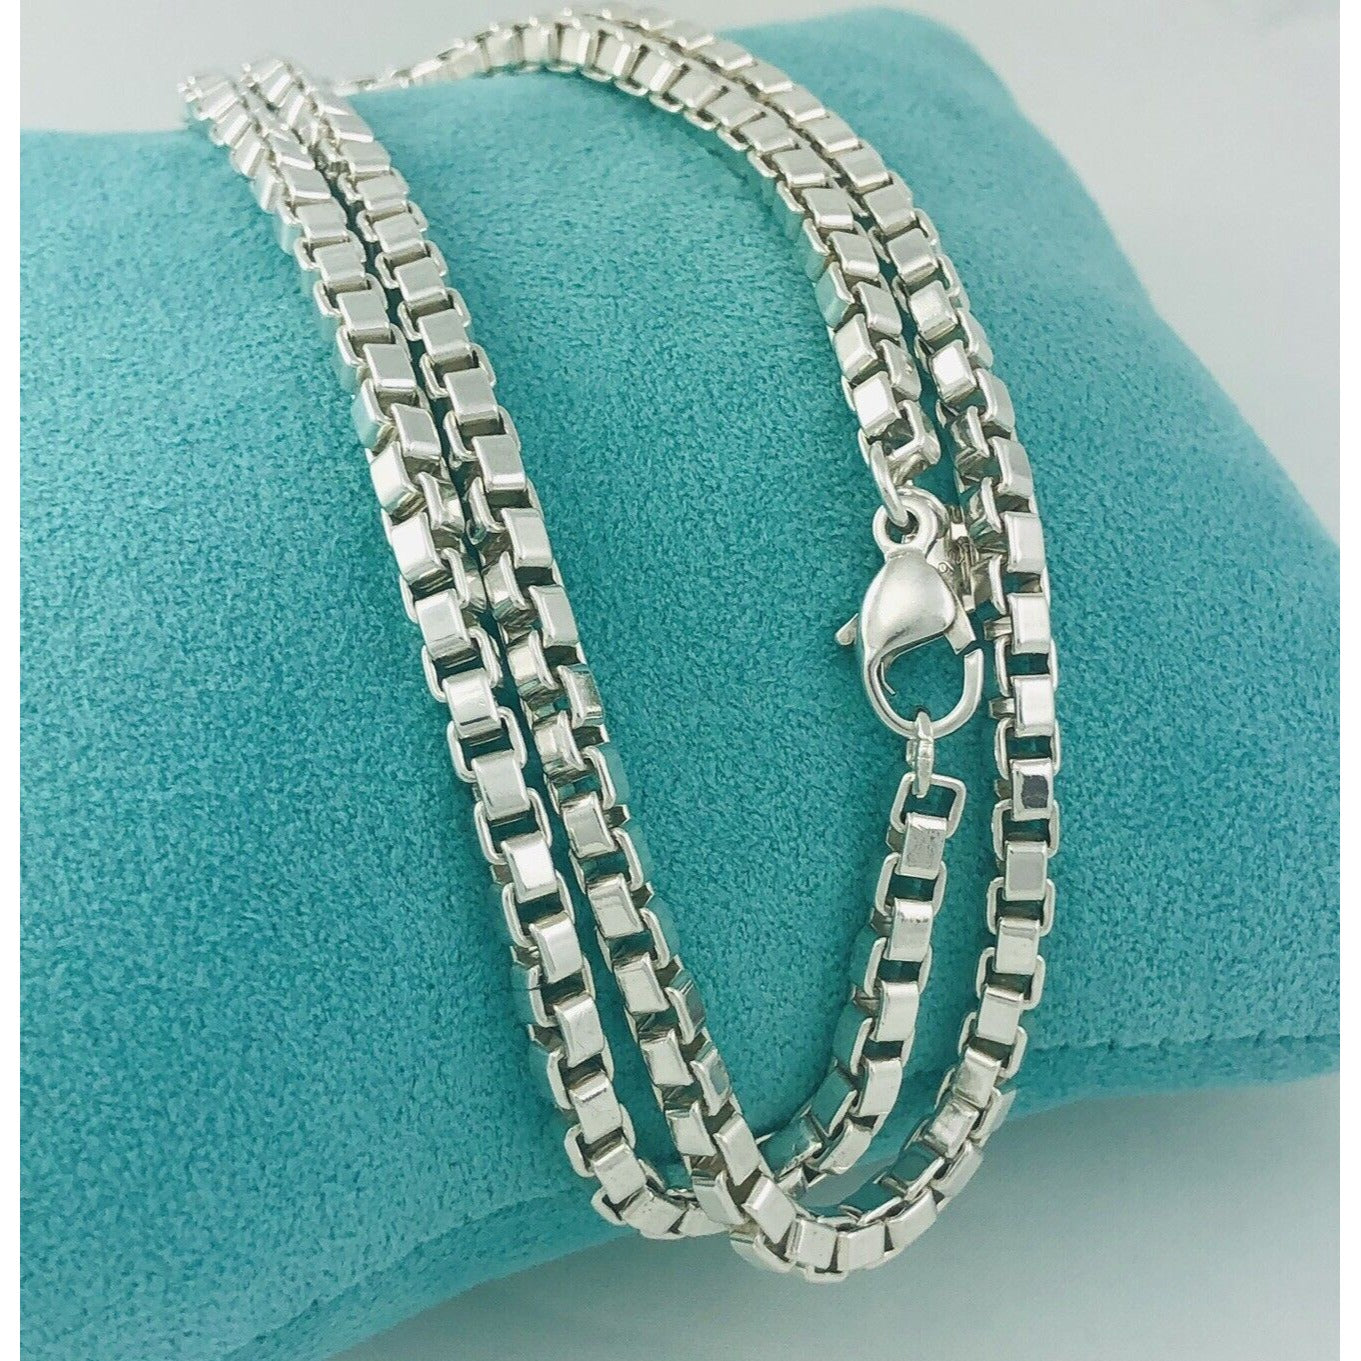 Tiffany and Co. Sterling Silver Venetian Link Necklace at 1stDibs | tiffany  venetian link necklace, venetian link necklace tiffany, tiffany venetian  necklace